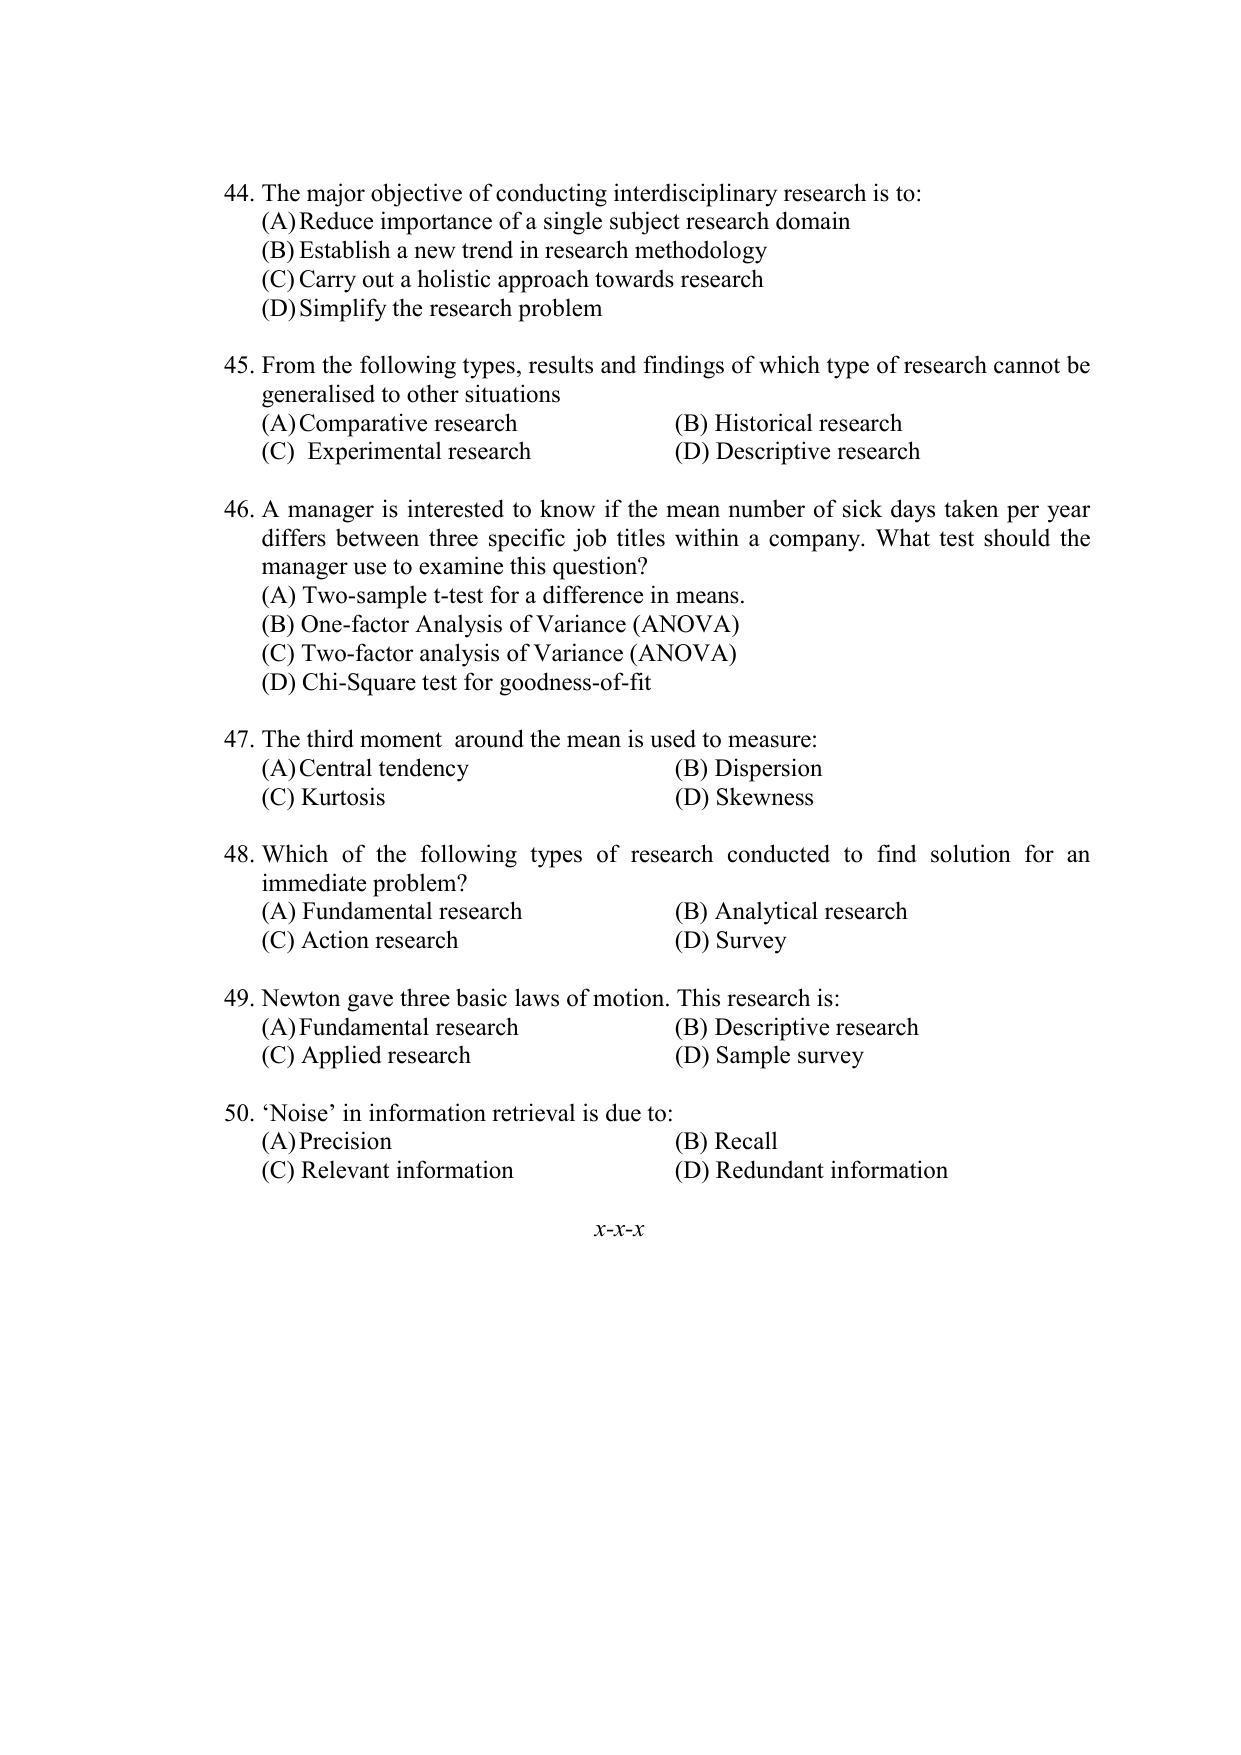 PU MPET Ancient Indian History & Archeology 2022 Question Papers - Page 12